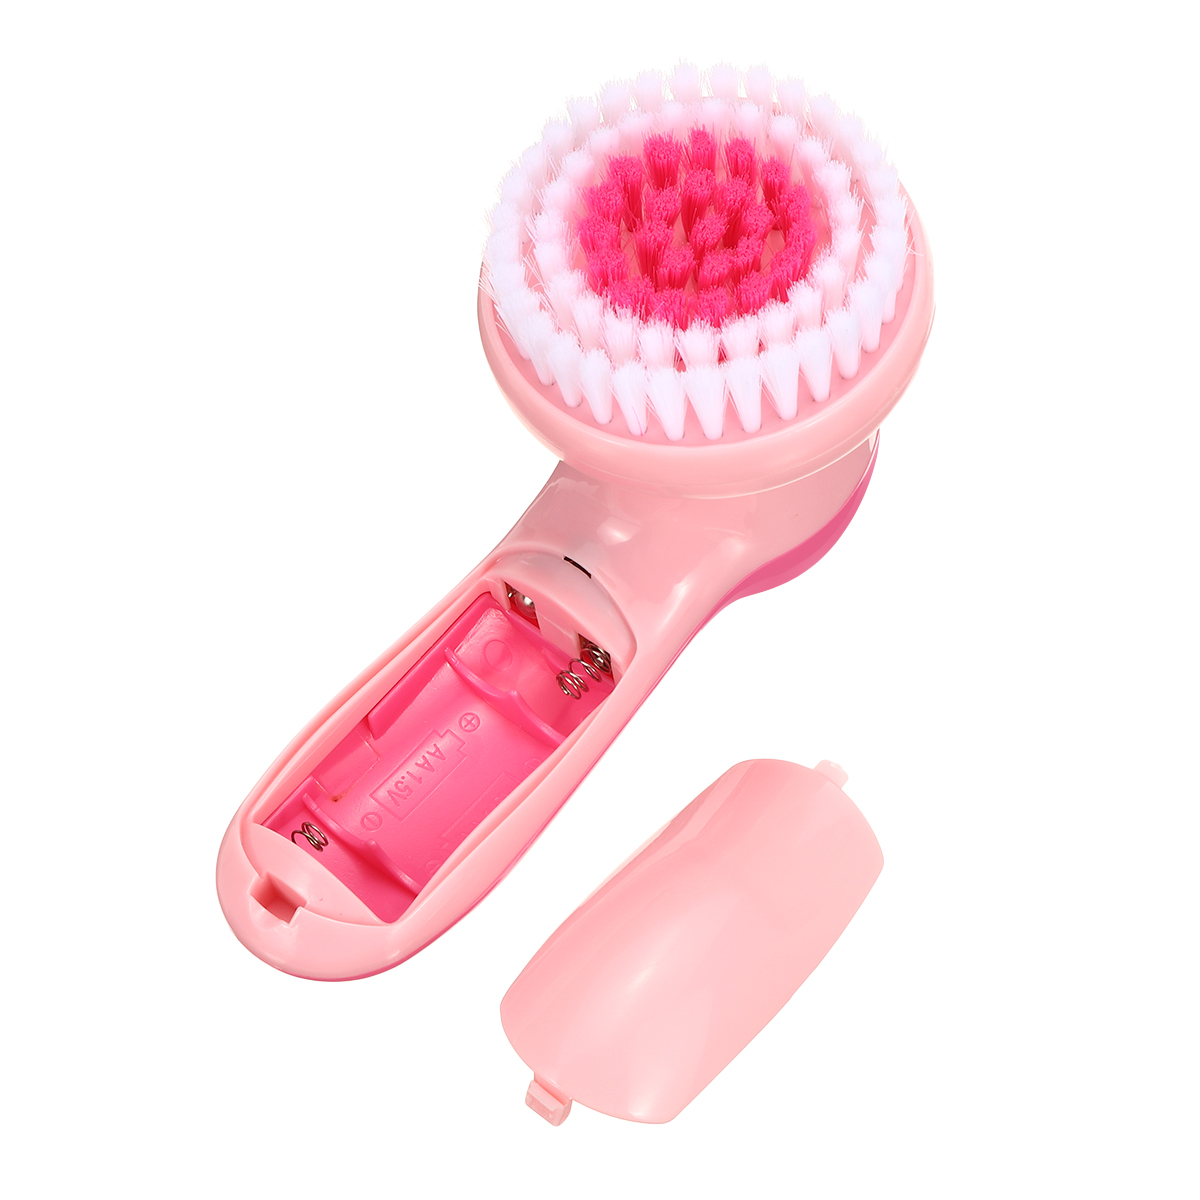 12-in-1-Electric-Facial-Cleaning-Brush-Wash-Face-Nose-Skin-Pore-Cleaner-Body-Massage-Beauty-Machine-1687416-7